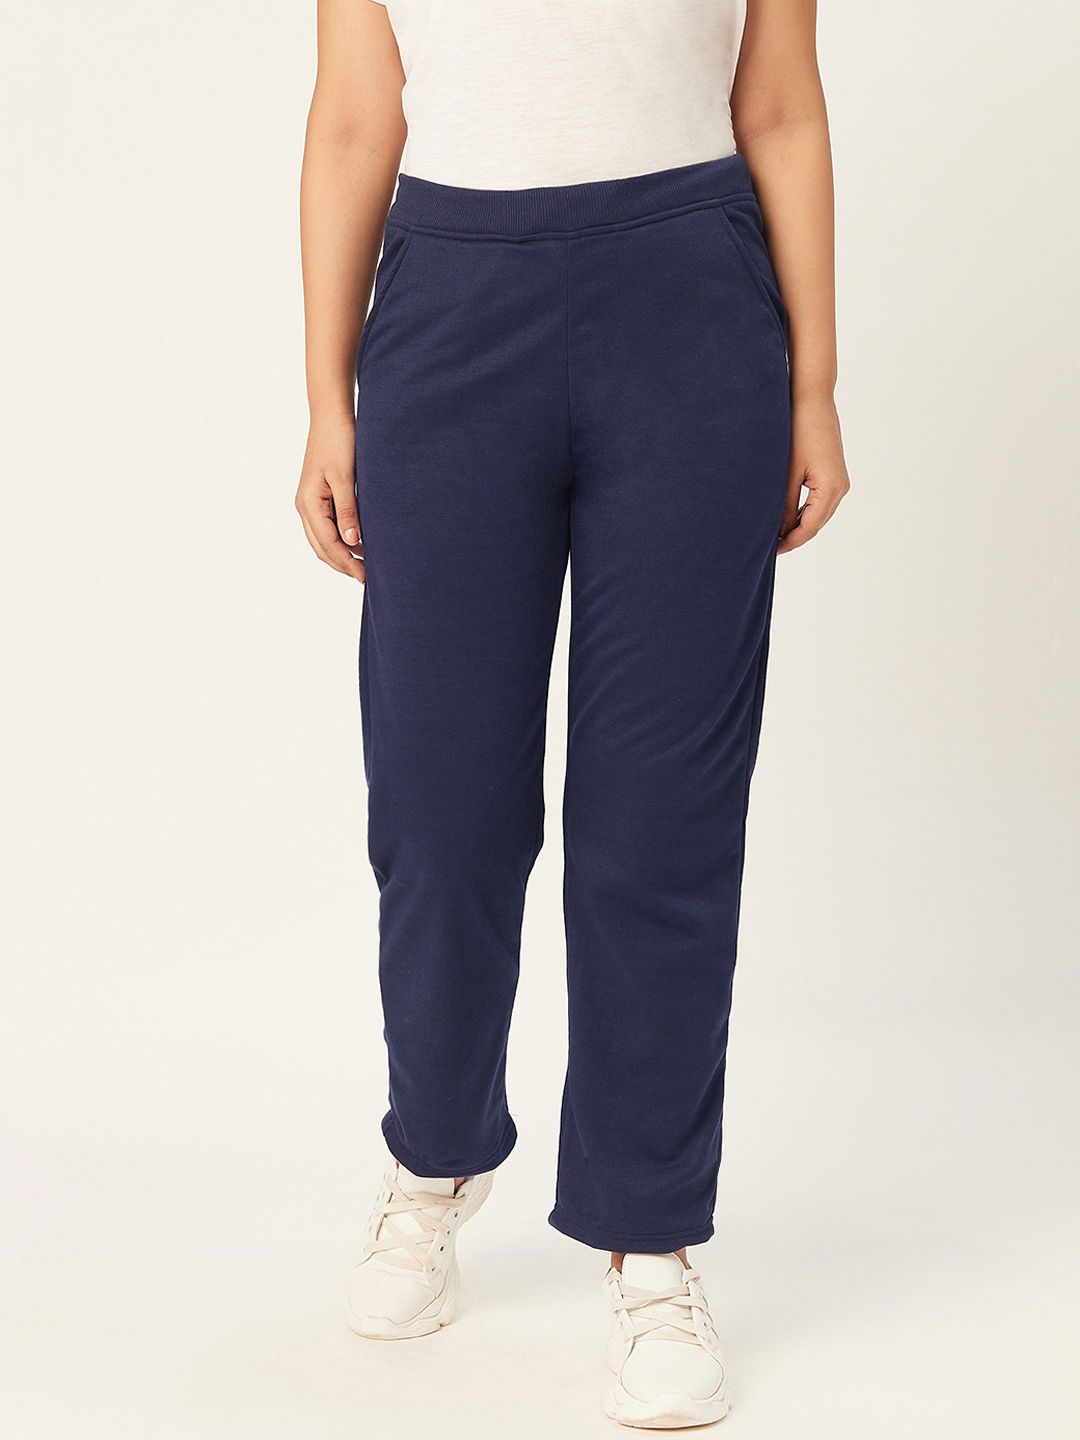 Alsace Lorraine Paris Women Navy Blue Solid Track Pants Price in India